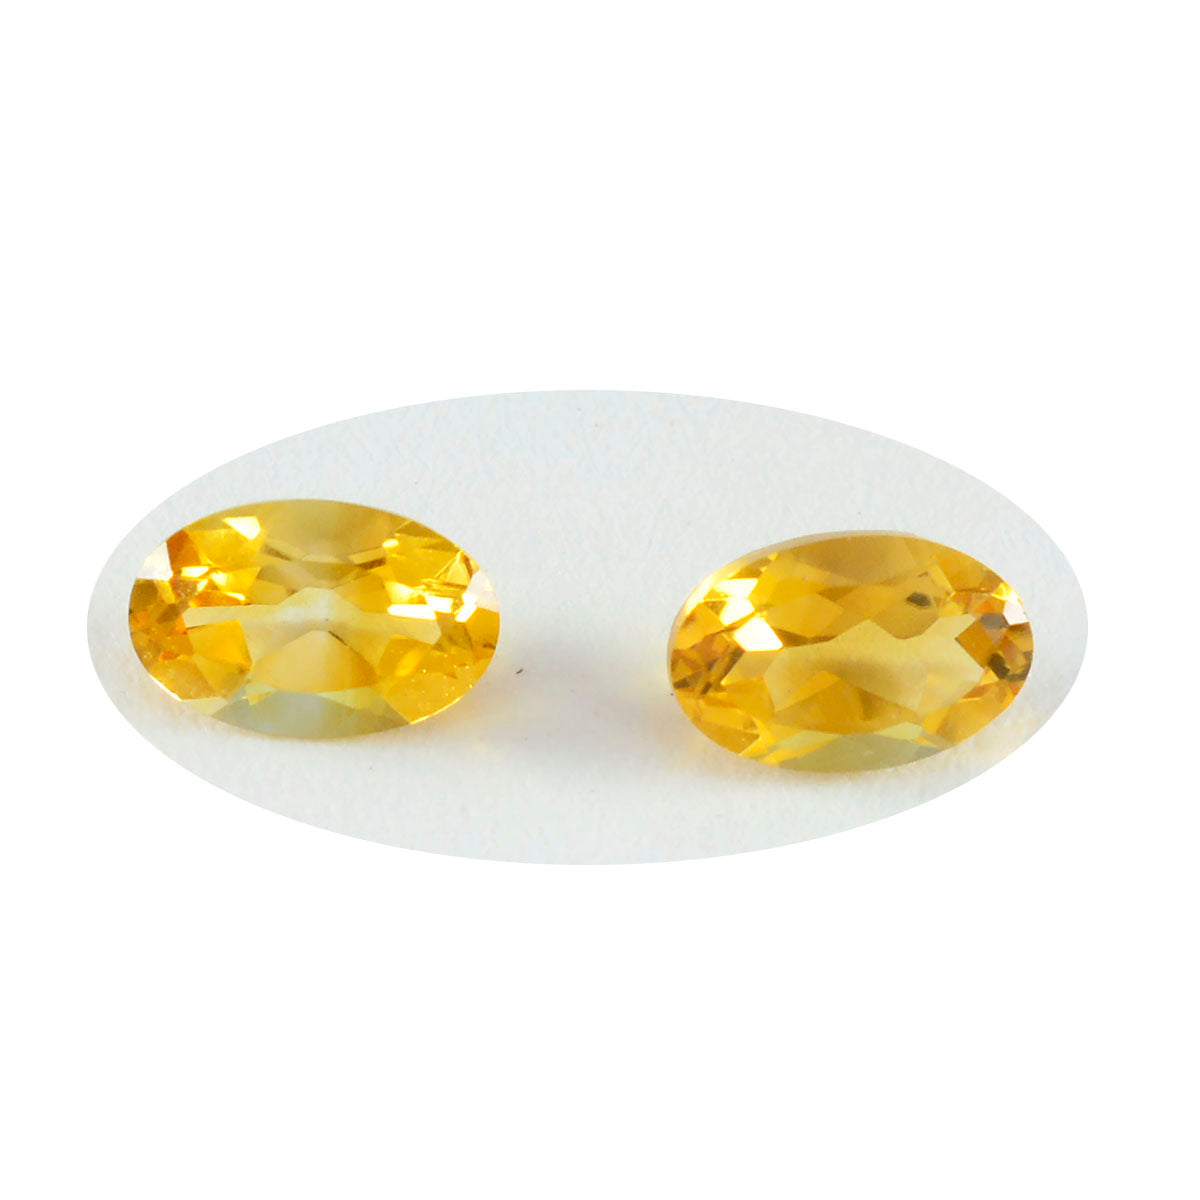 Riyogems 1PC Real Yellow Citrine Faceted 6x8 mm Oval Shape attractive Quality Loose Stone